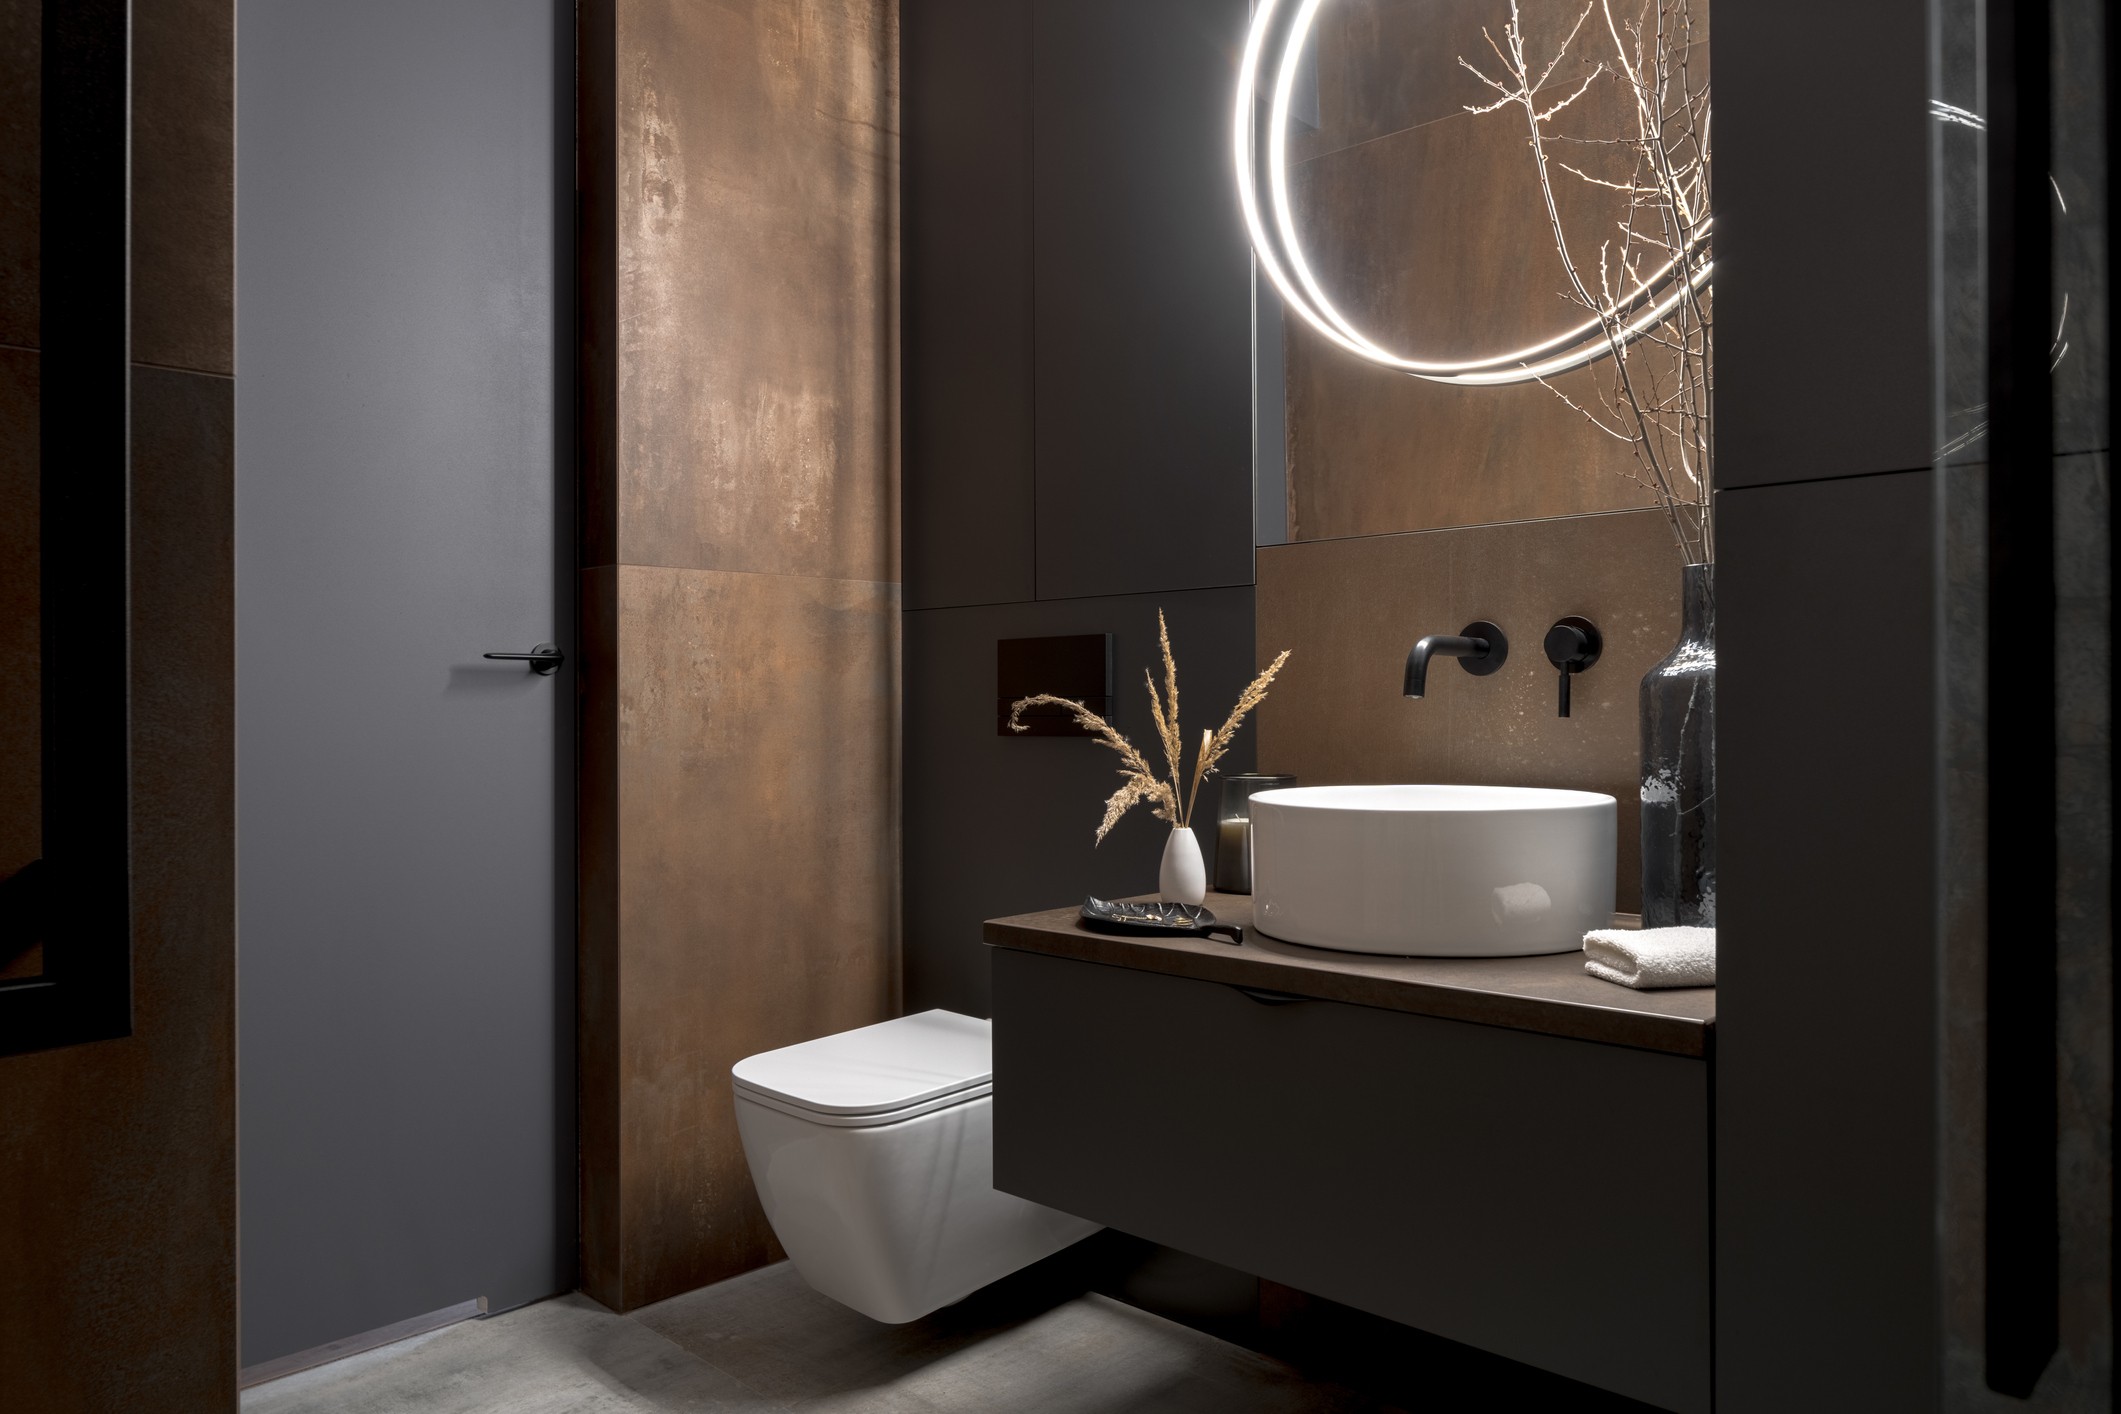 Dark, modern bathroom with rusty-toned wall tiles, and black and white fixtures.